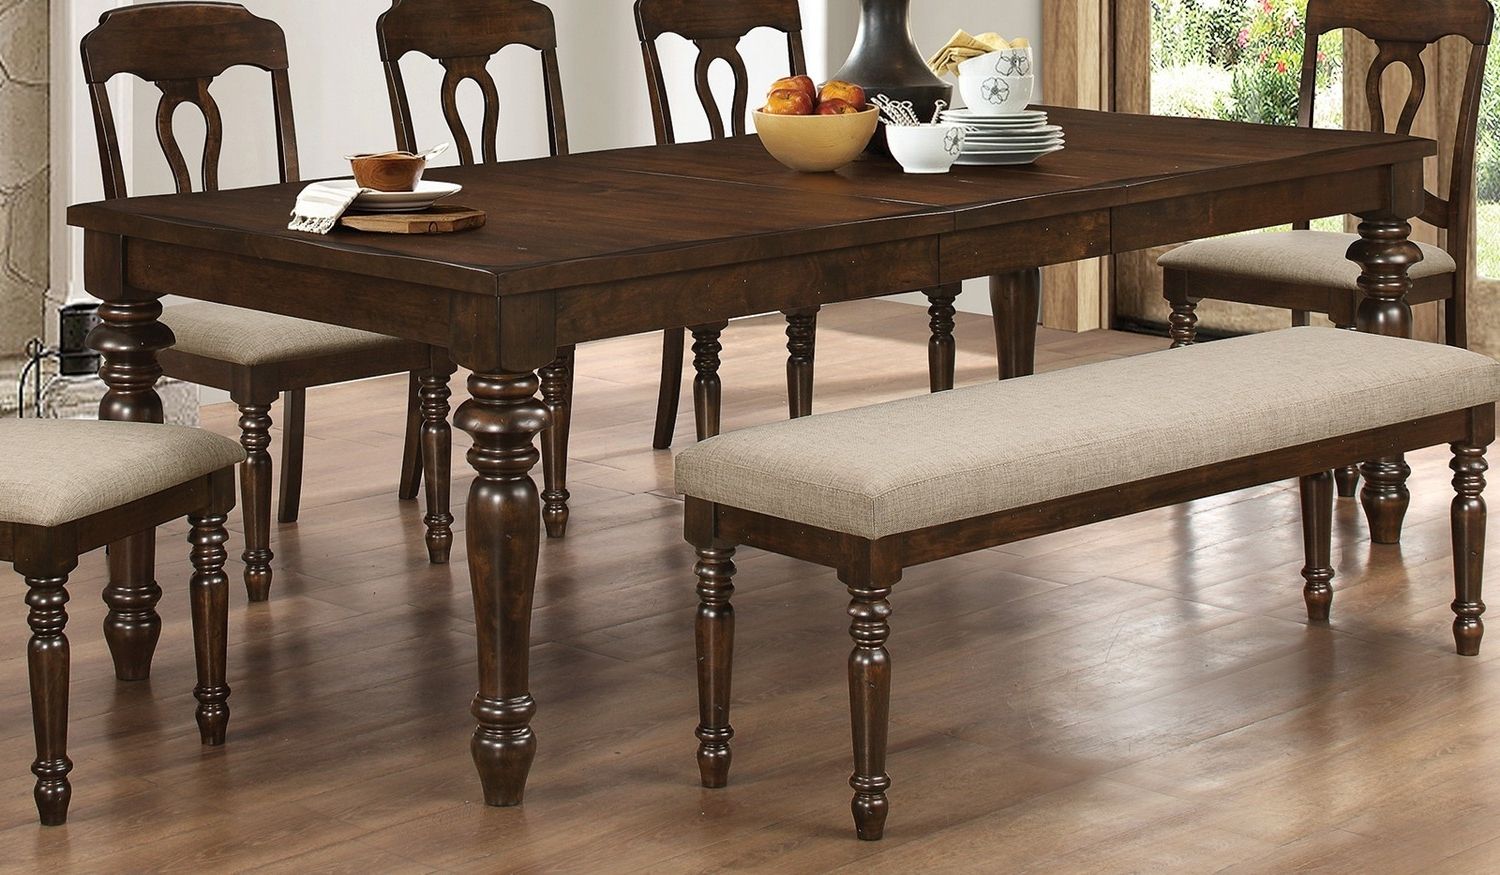 Latest Hamilton Dining Tables Regarding Coaster Hamilton Dining Table – Antique Tobacco 106351 At Homelement (Photo 1 of 25)